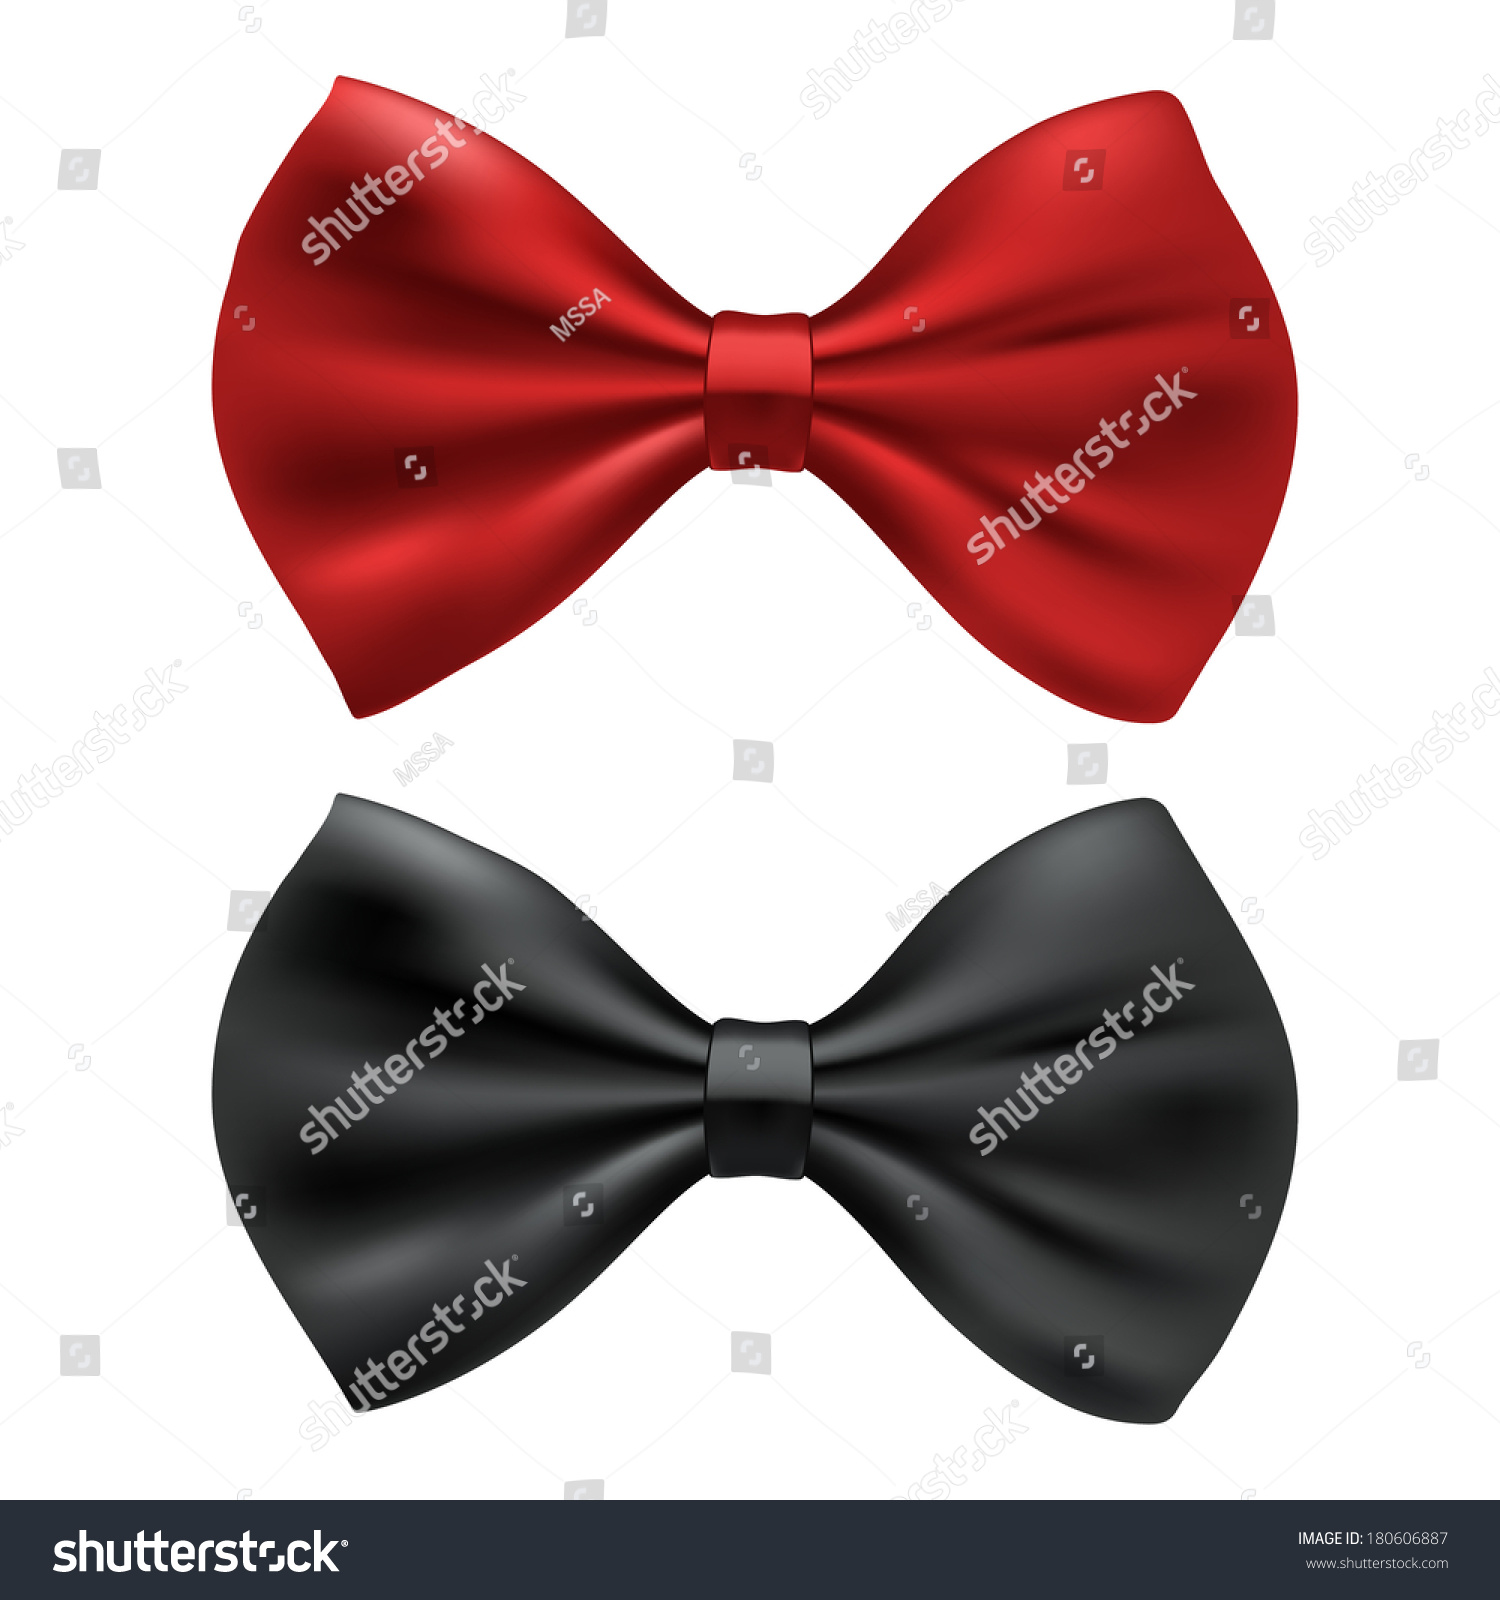 Vector Red Black Bow Ties Isolated Stock Vector 180606887 - Shutterstock